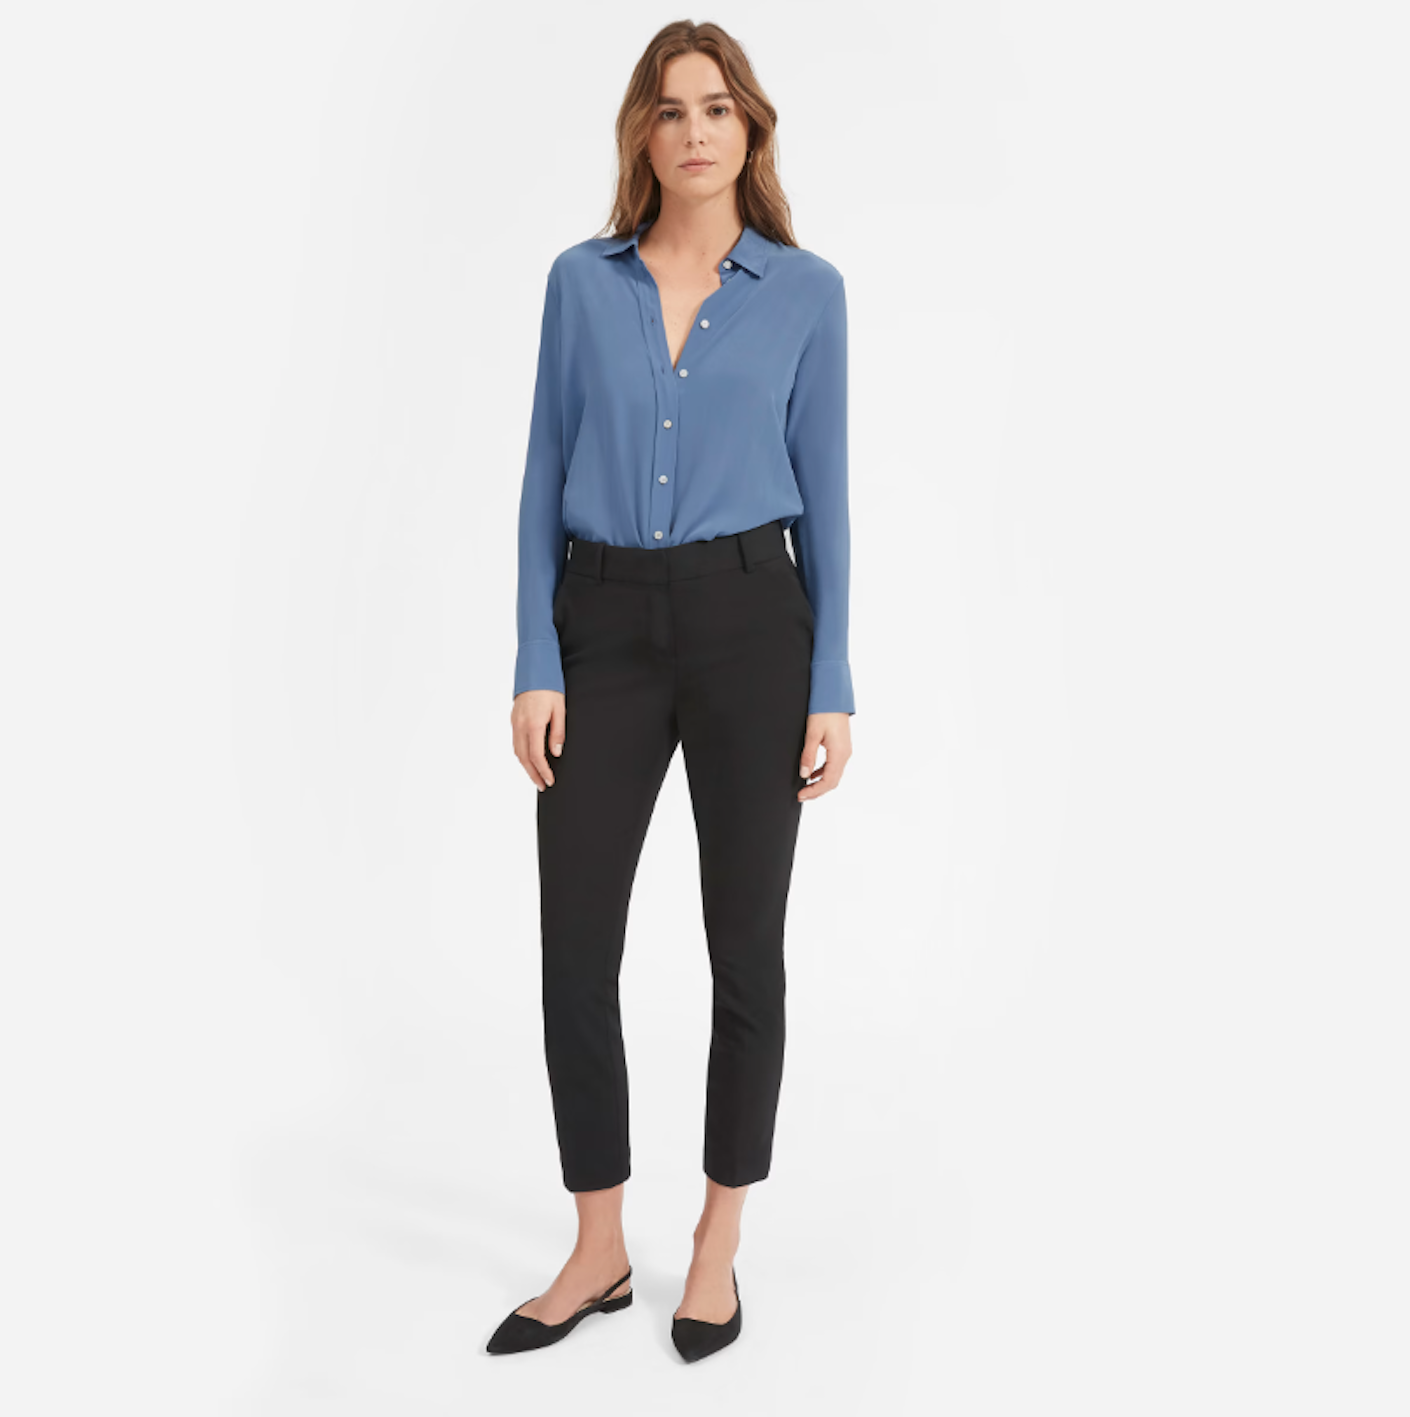 A woman wears a blue silk button down shirt with black jeans.